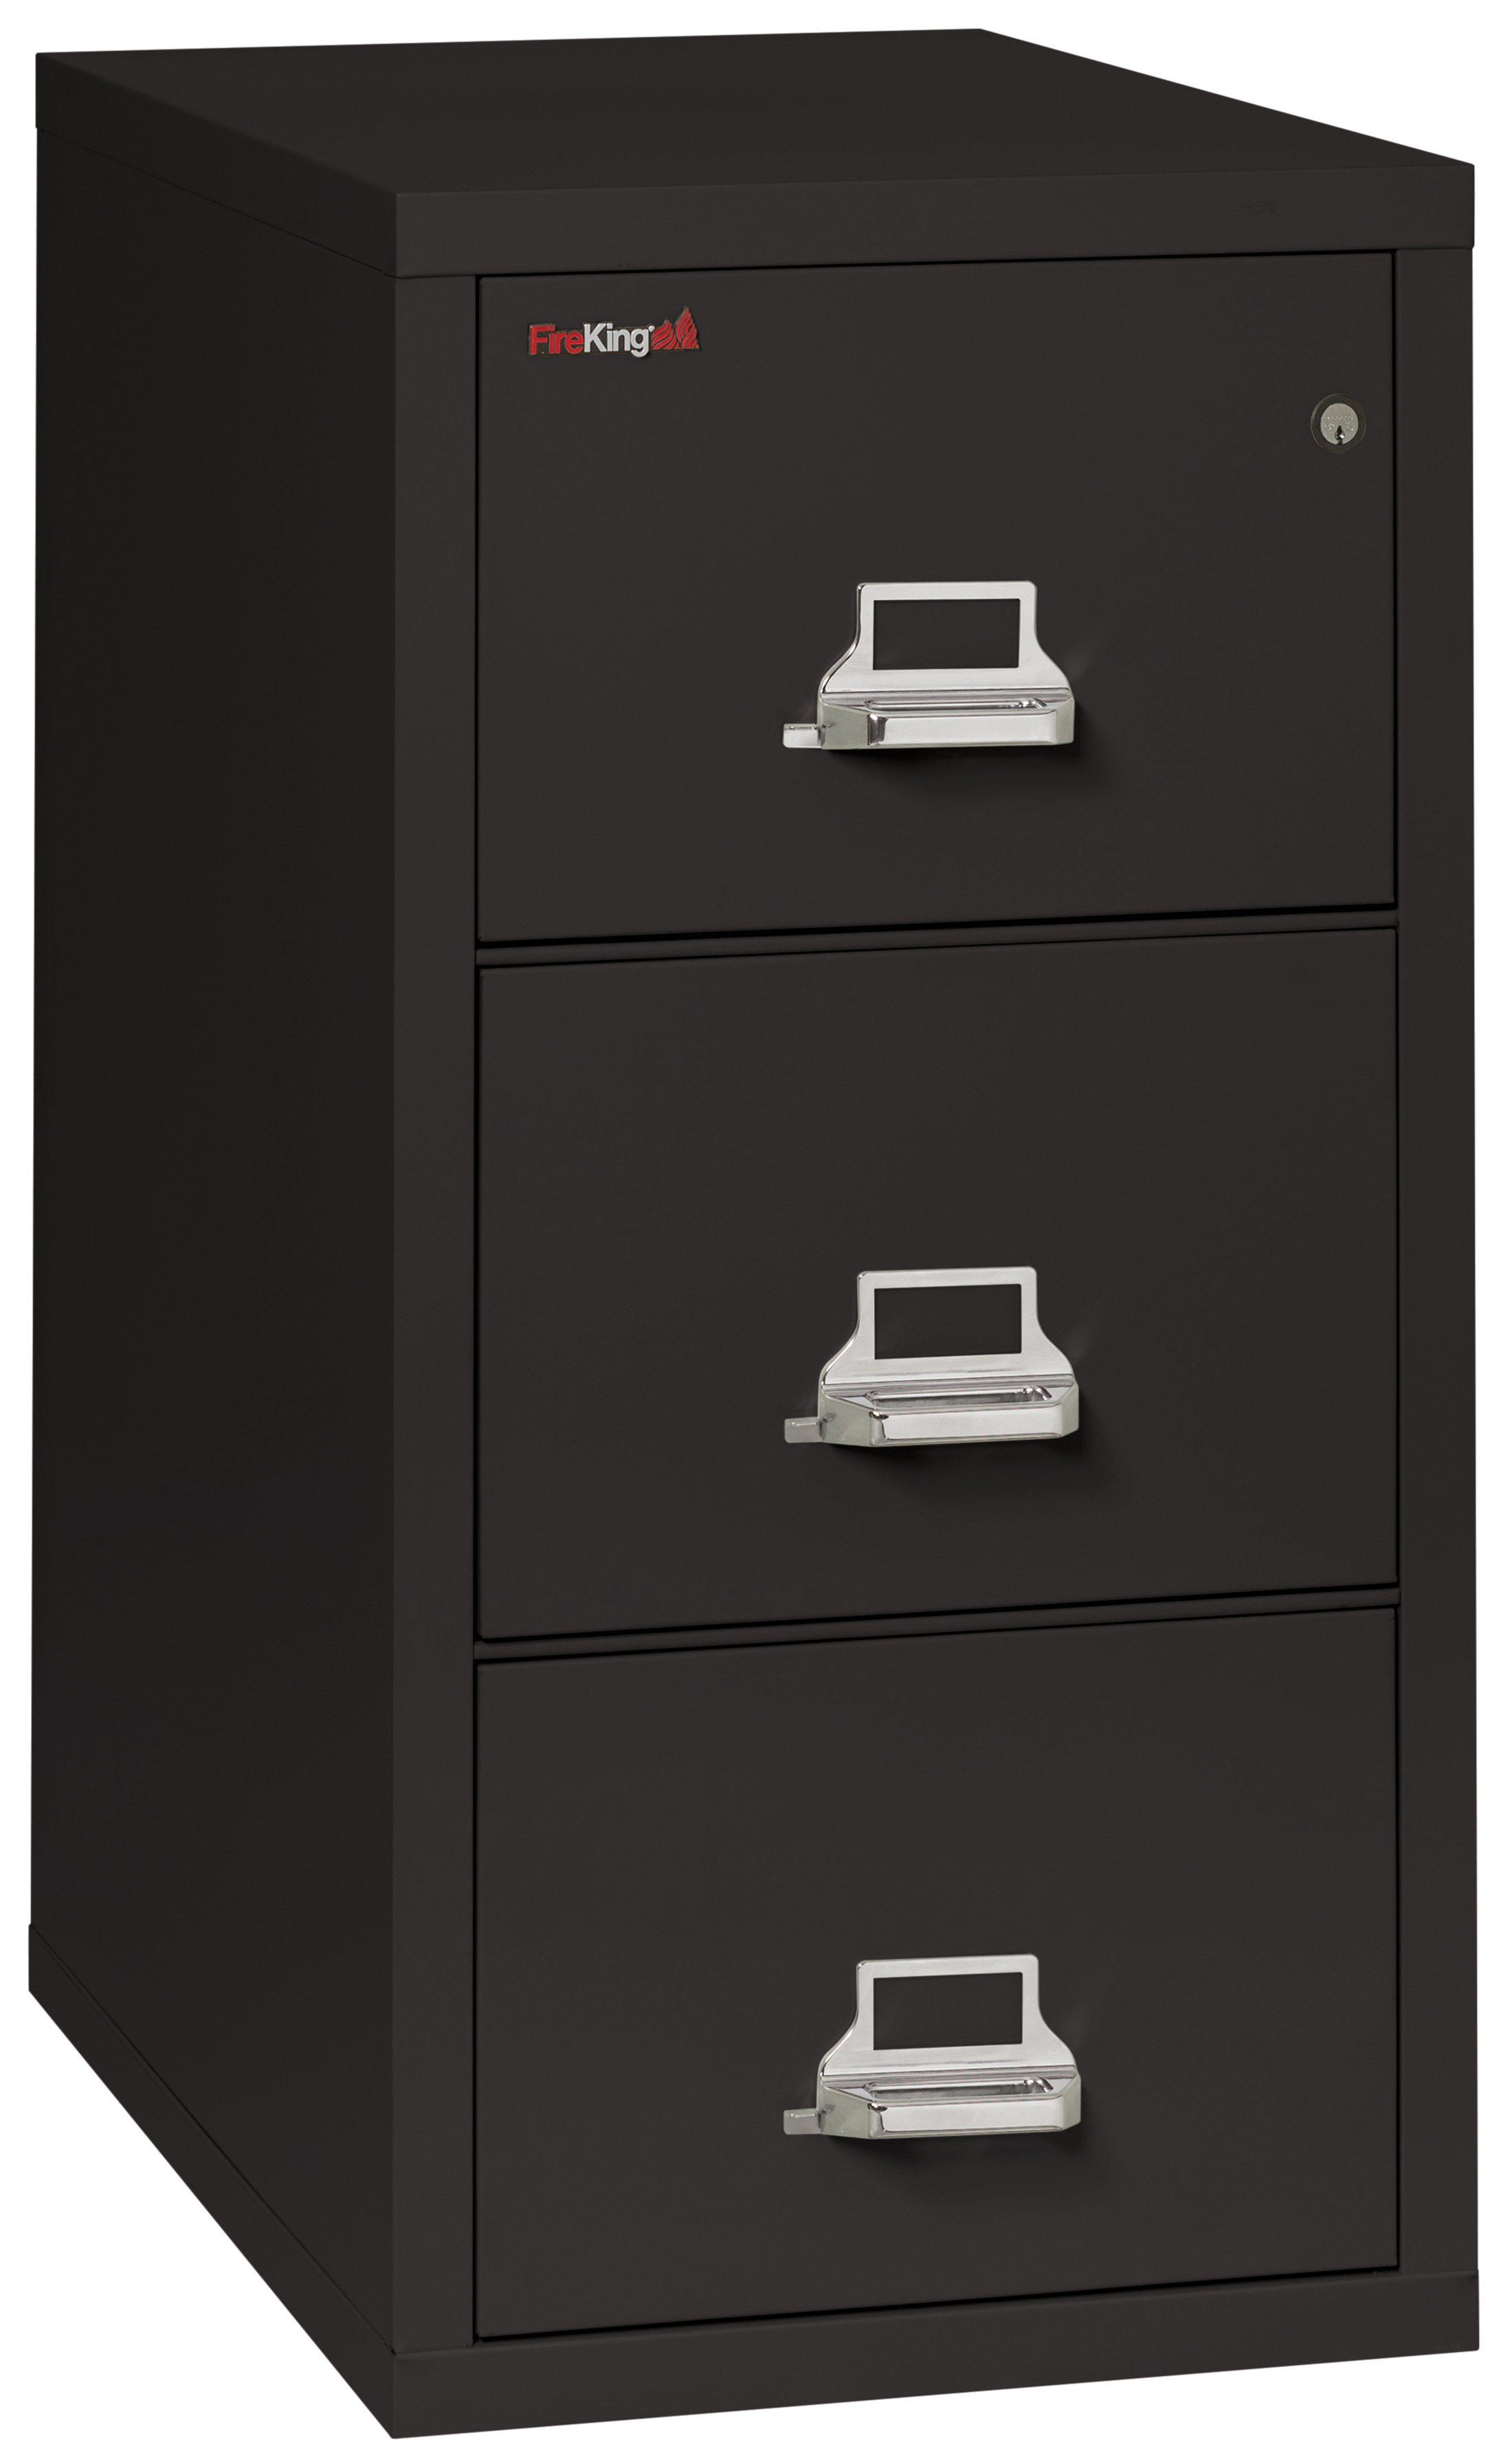 Fireking Fireproof 3 Drawer Vertical File Cabinet Wayfair intended for proportions 2197 X 3585